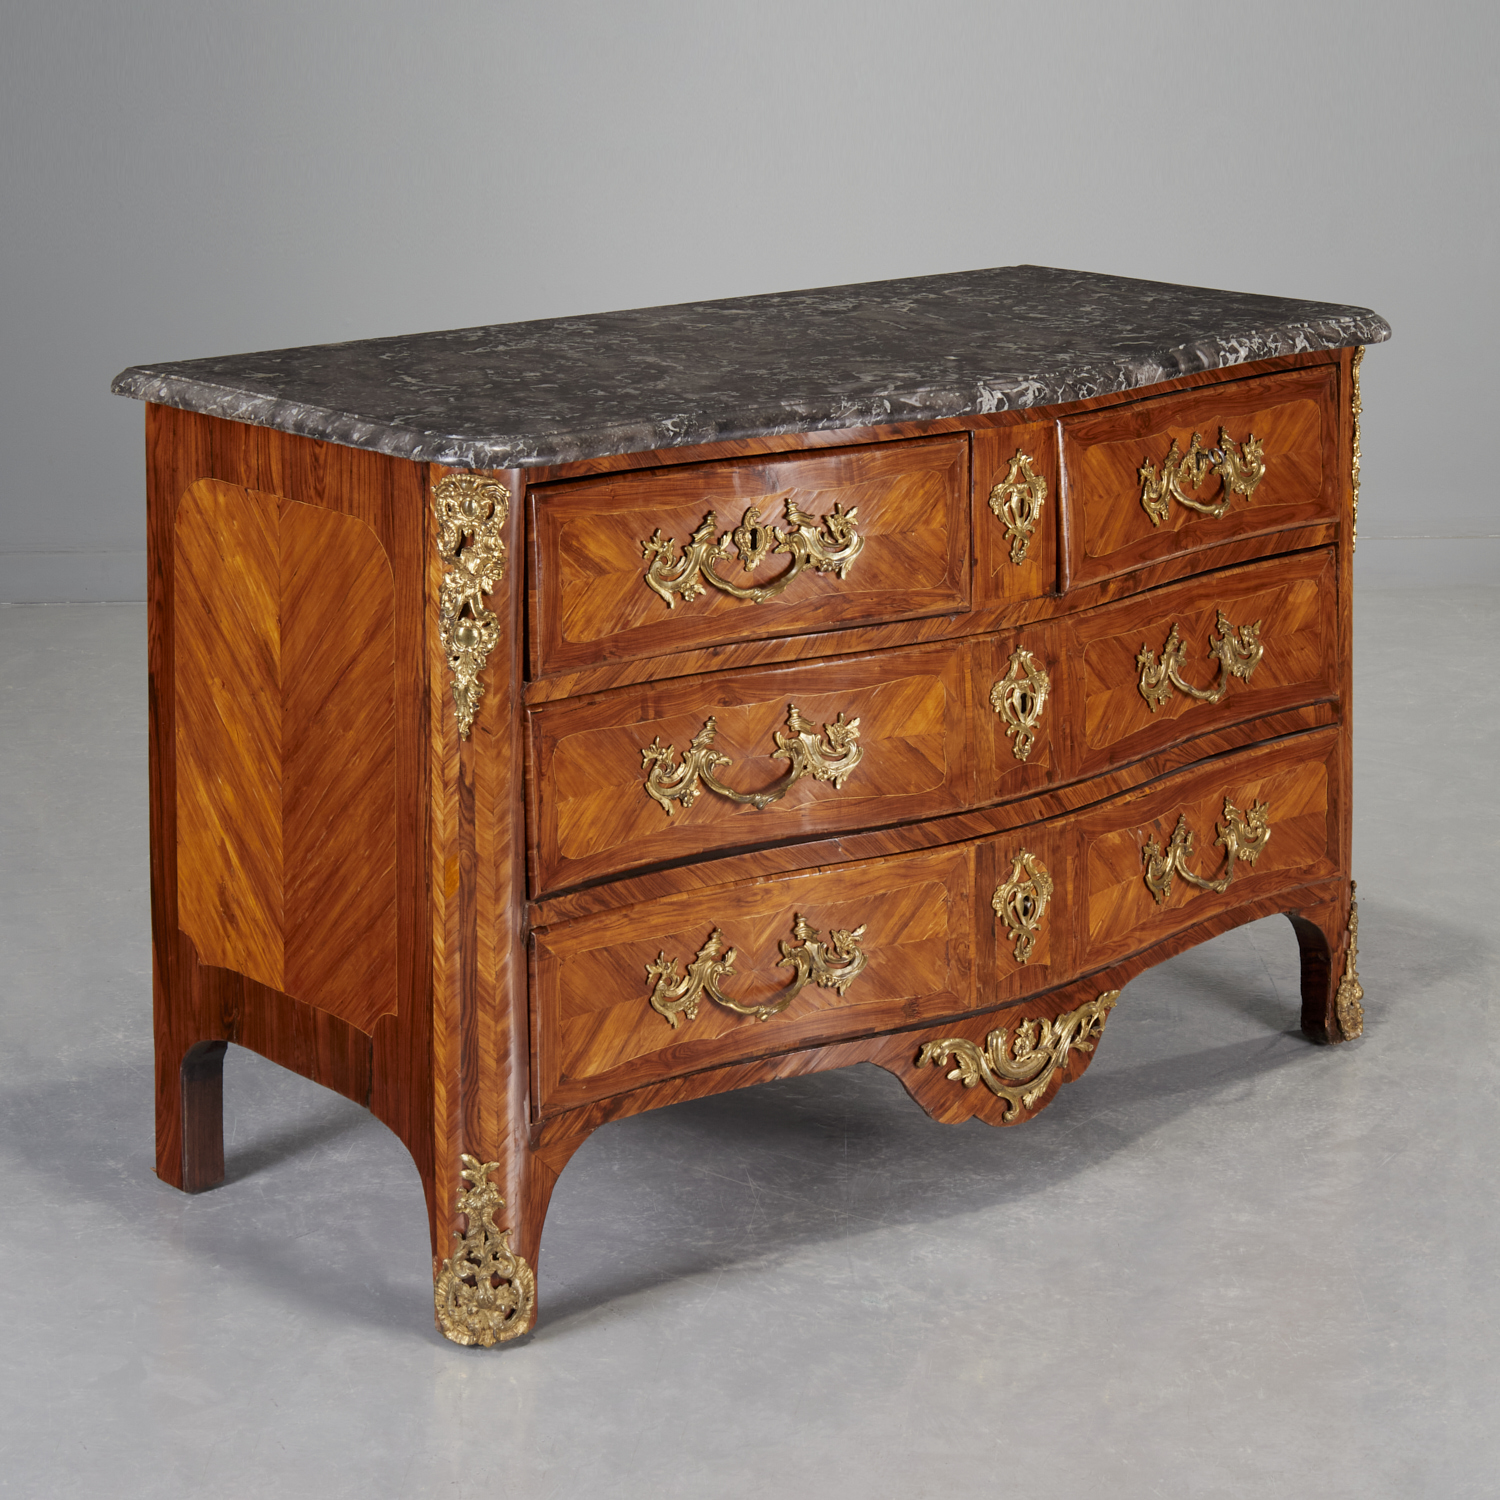 LOUIS XVI MARQUETRY COMMODE, SIGNED